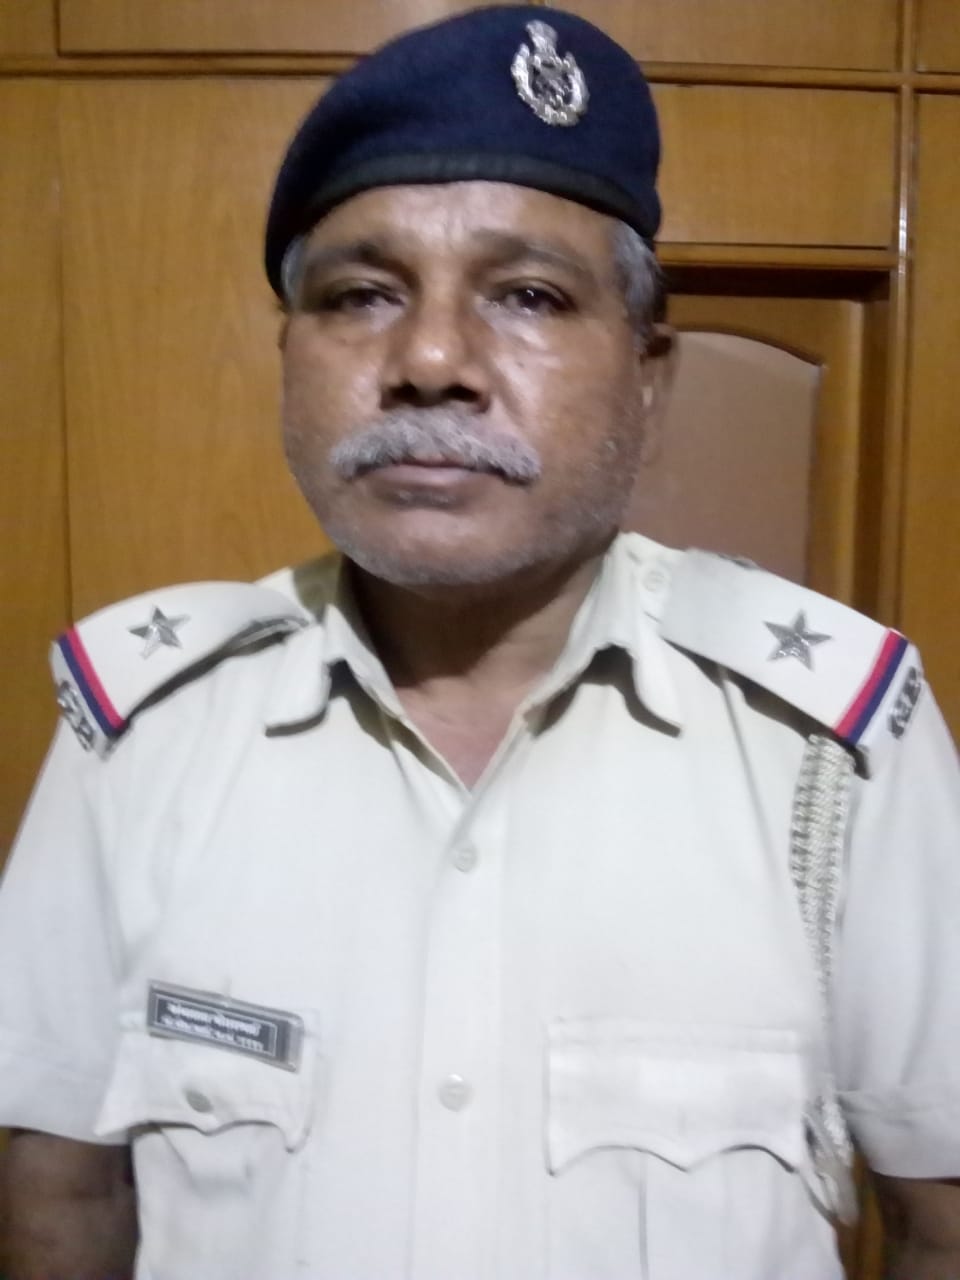 ASI from Vadodara resumed duty immediately after attending the funeral of his sister